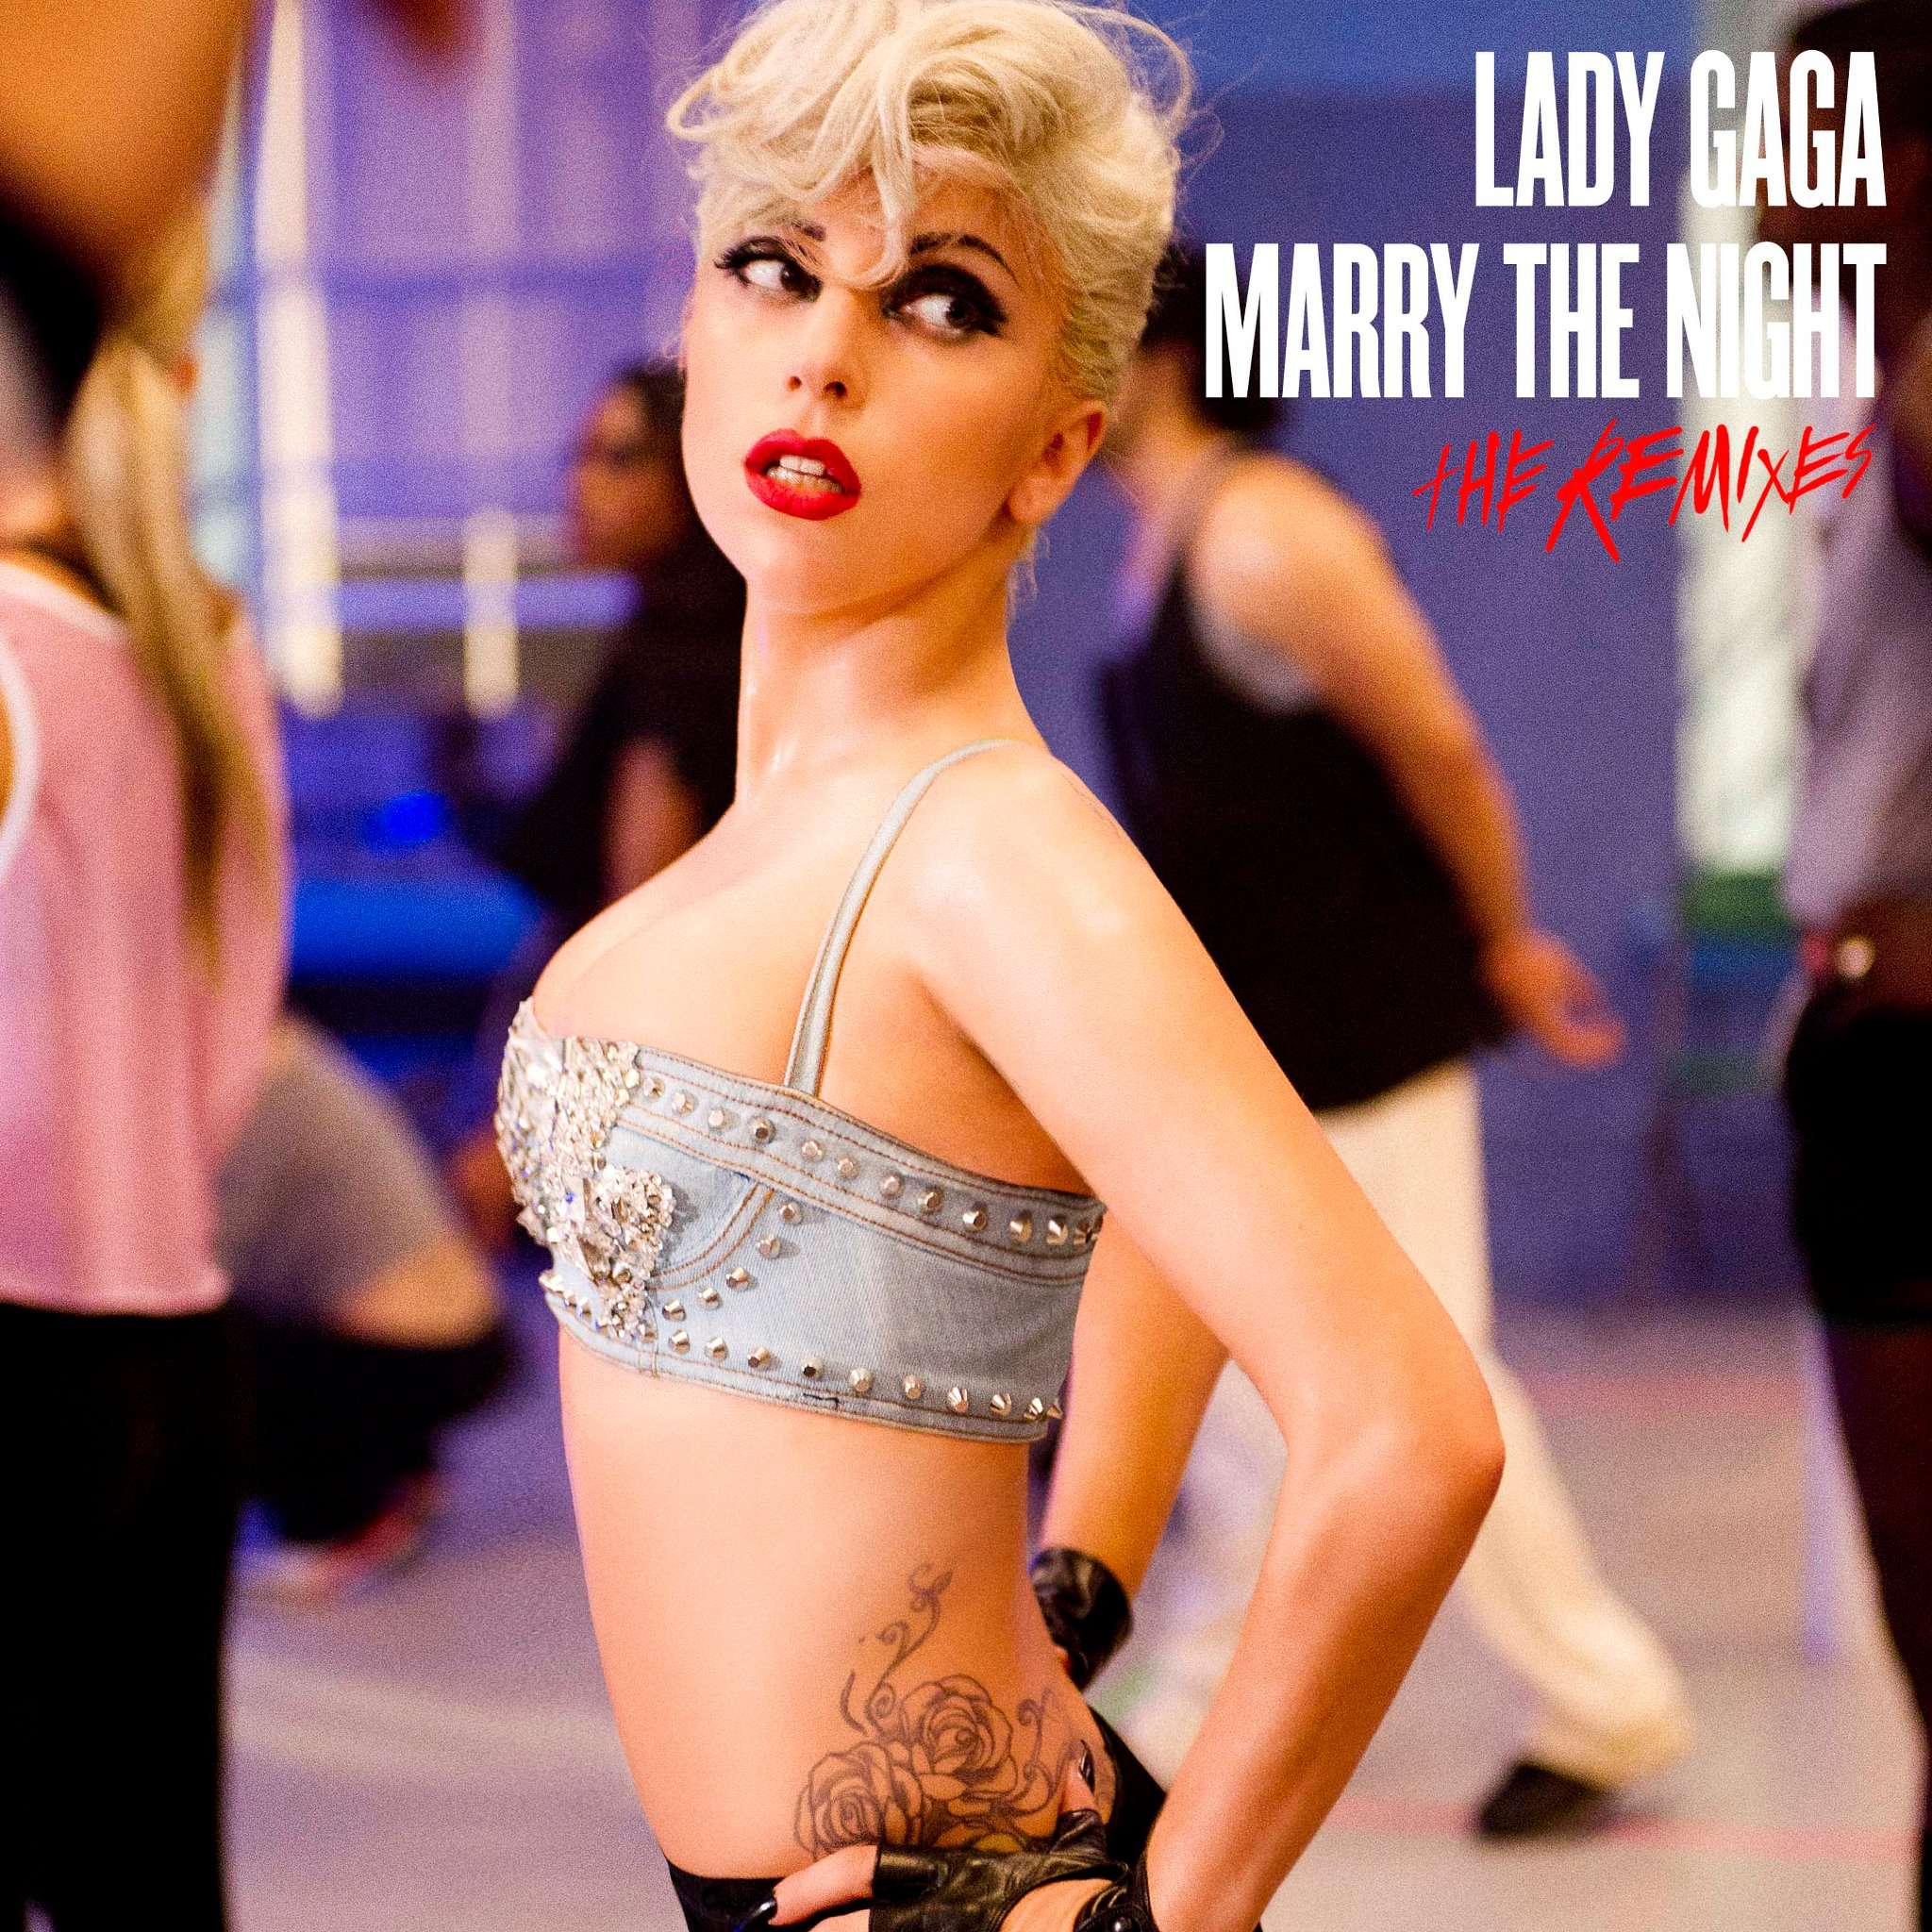 Lady Gaga - Marry The Night (The Remixes) 2011